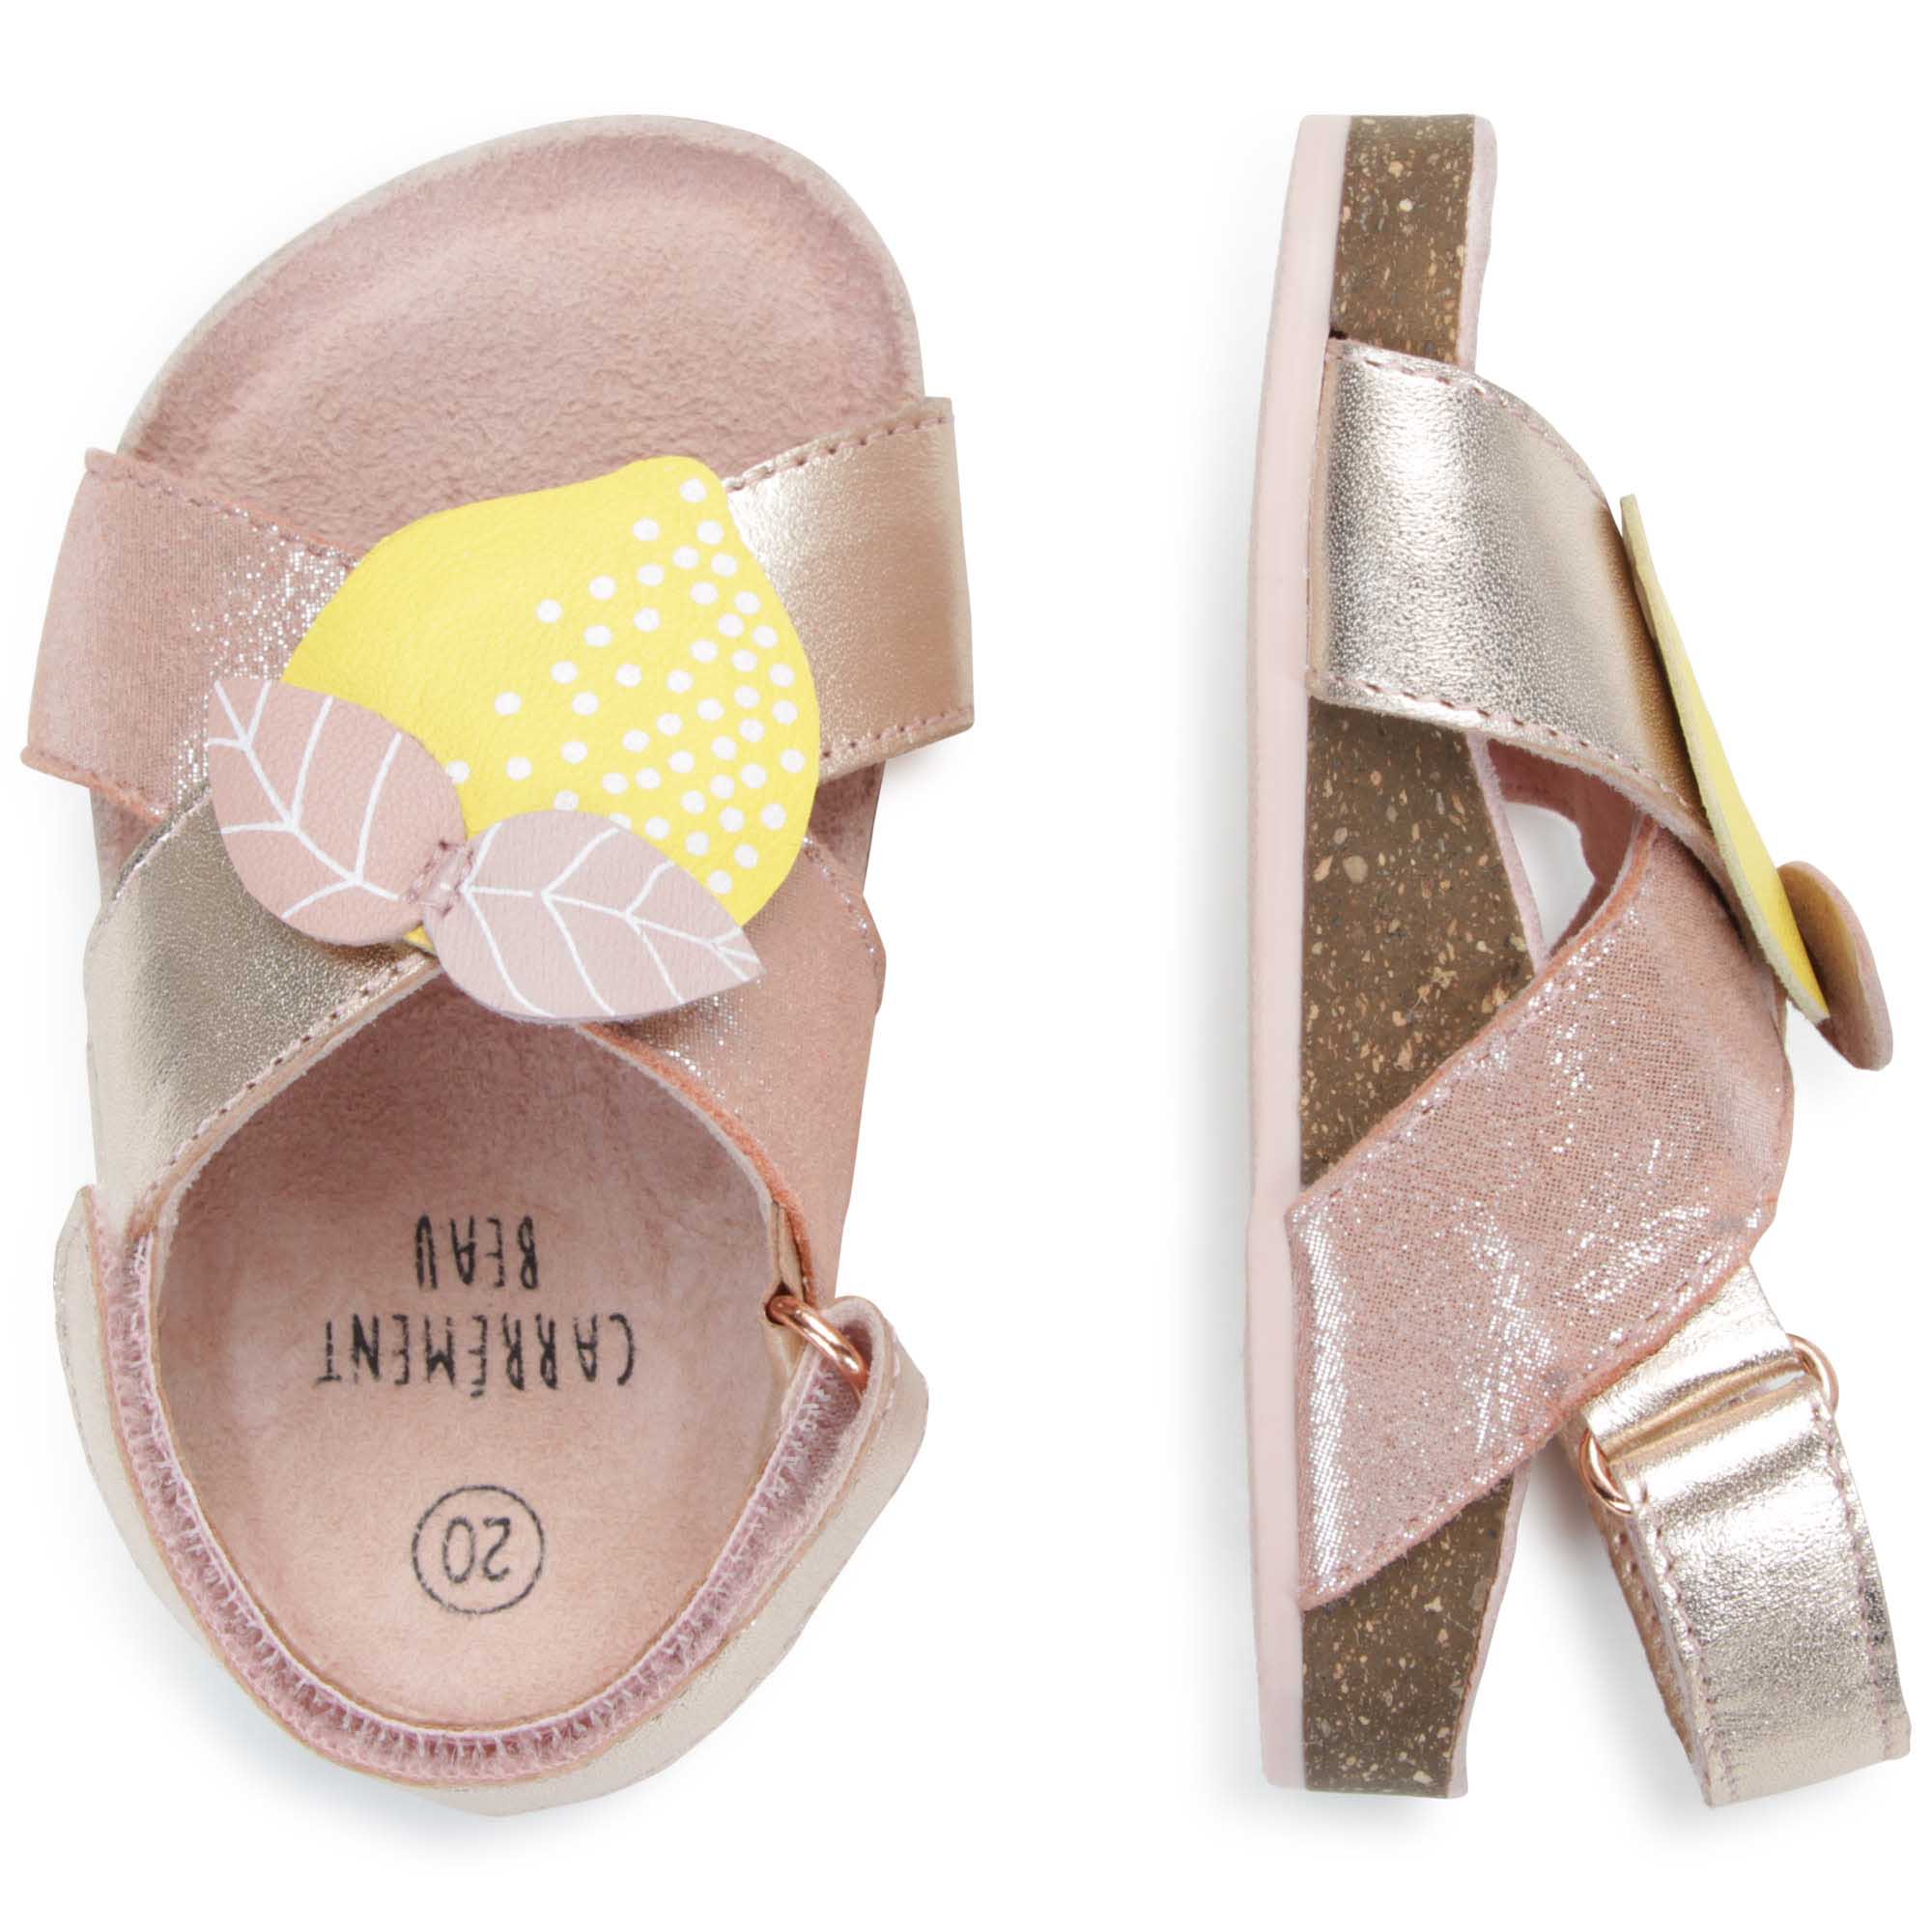 Leather hook-and-loop sandals CARREMENT BEAU for GIRL